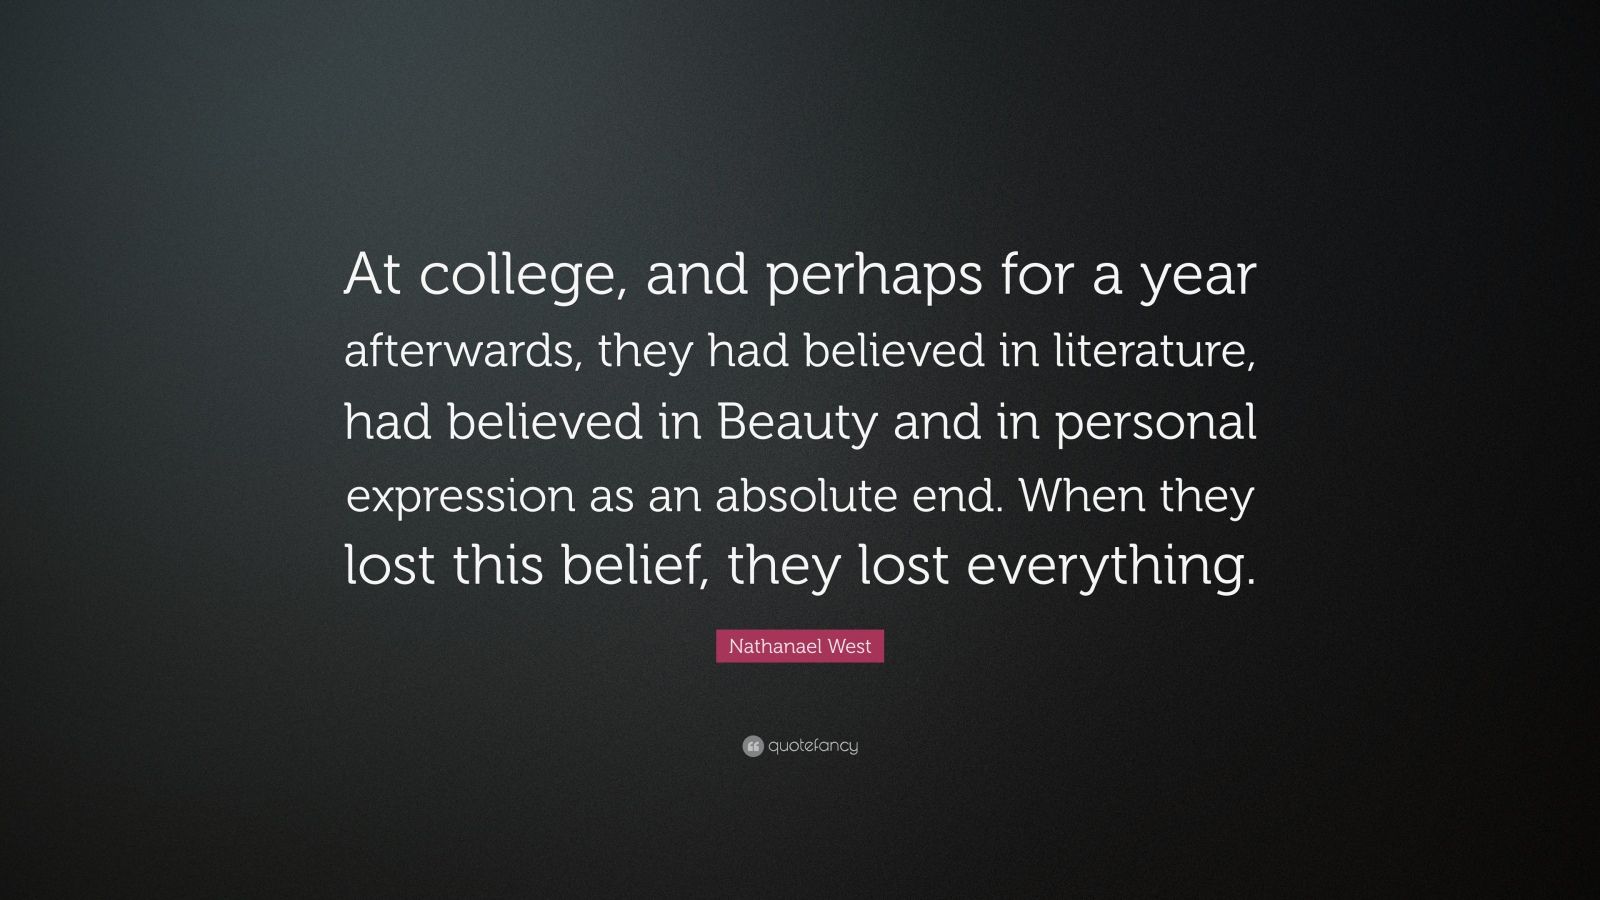 Nathanael West Quote: “At college, and perhaps for a year afterwards